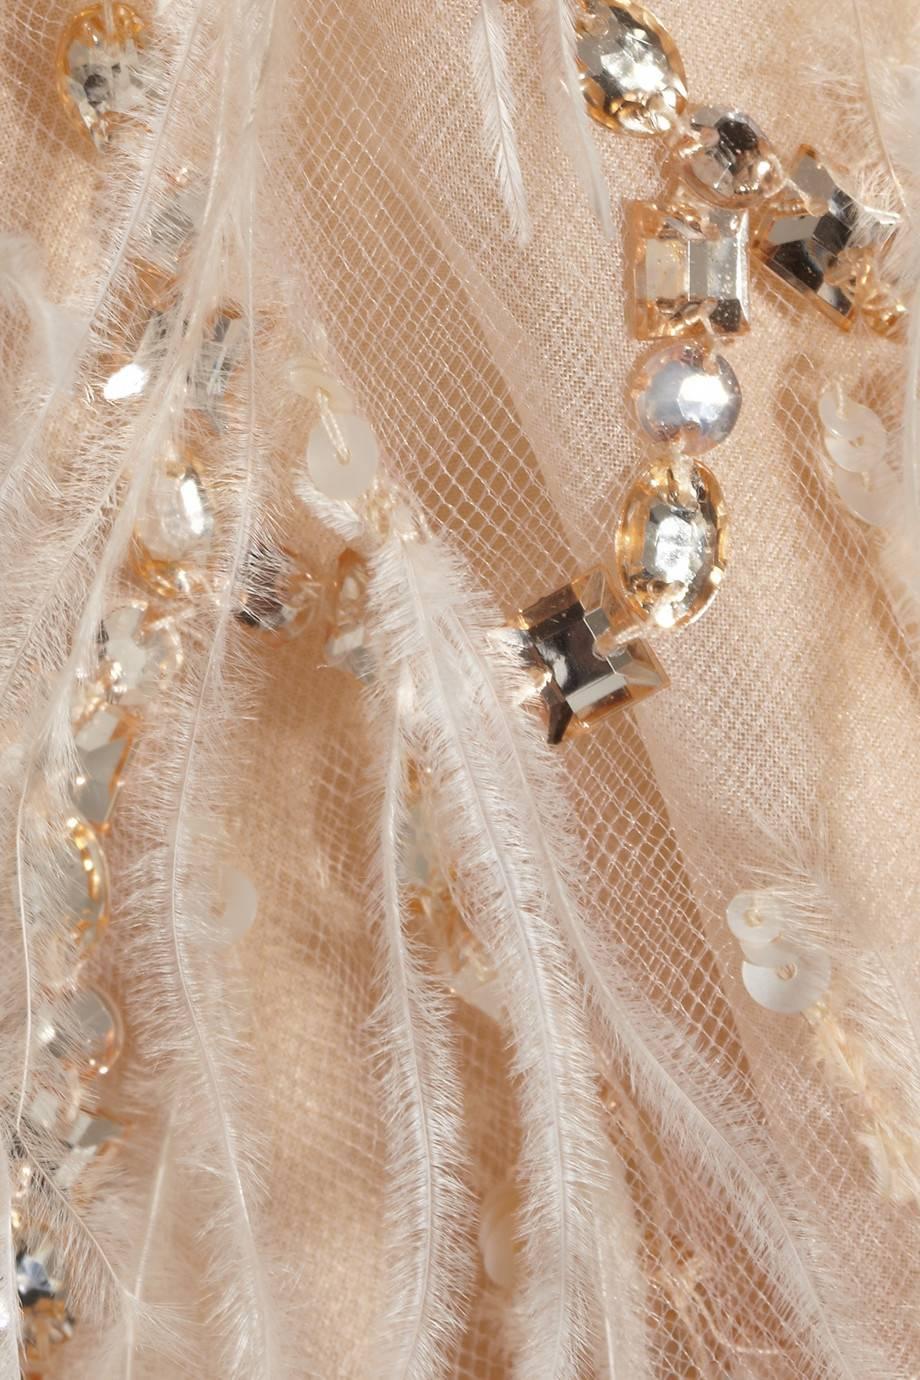 New Oscar De La Renta Feather and Crystal-Embellished Tulle Gown.
US size 8
Oscar de la Renta's tulle gown captivated us the instant it came down the runway. Embellished with wispy feathers and glimmering crystals, this floor-sweeping style is lined